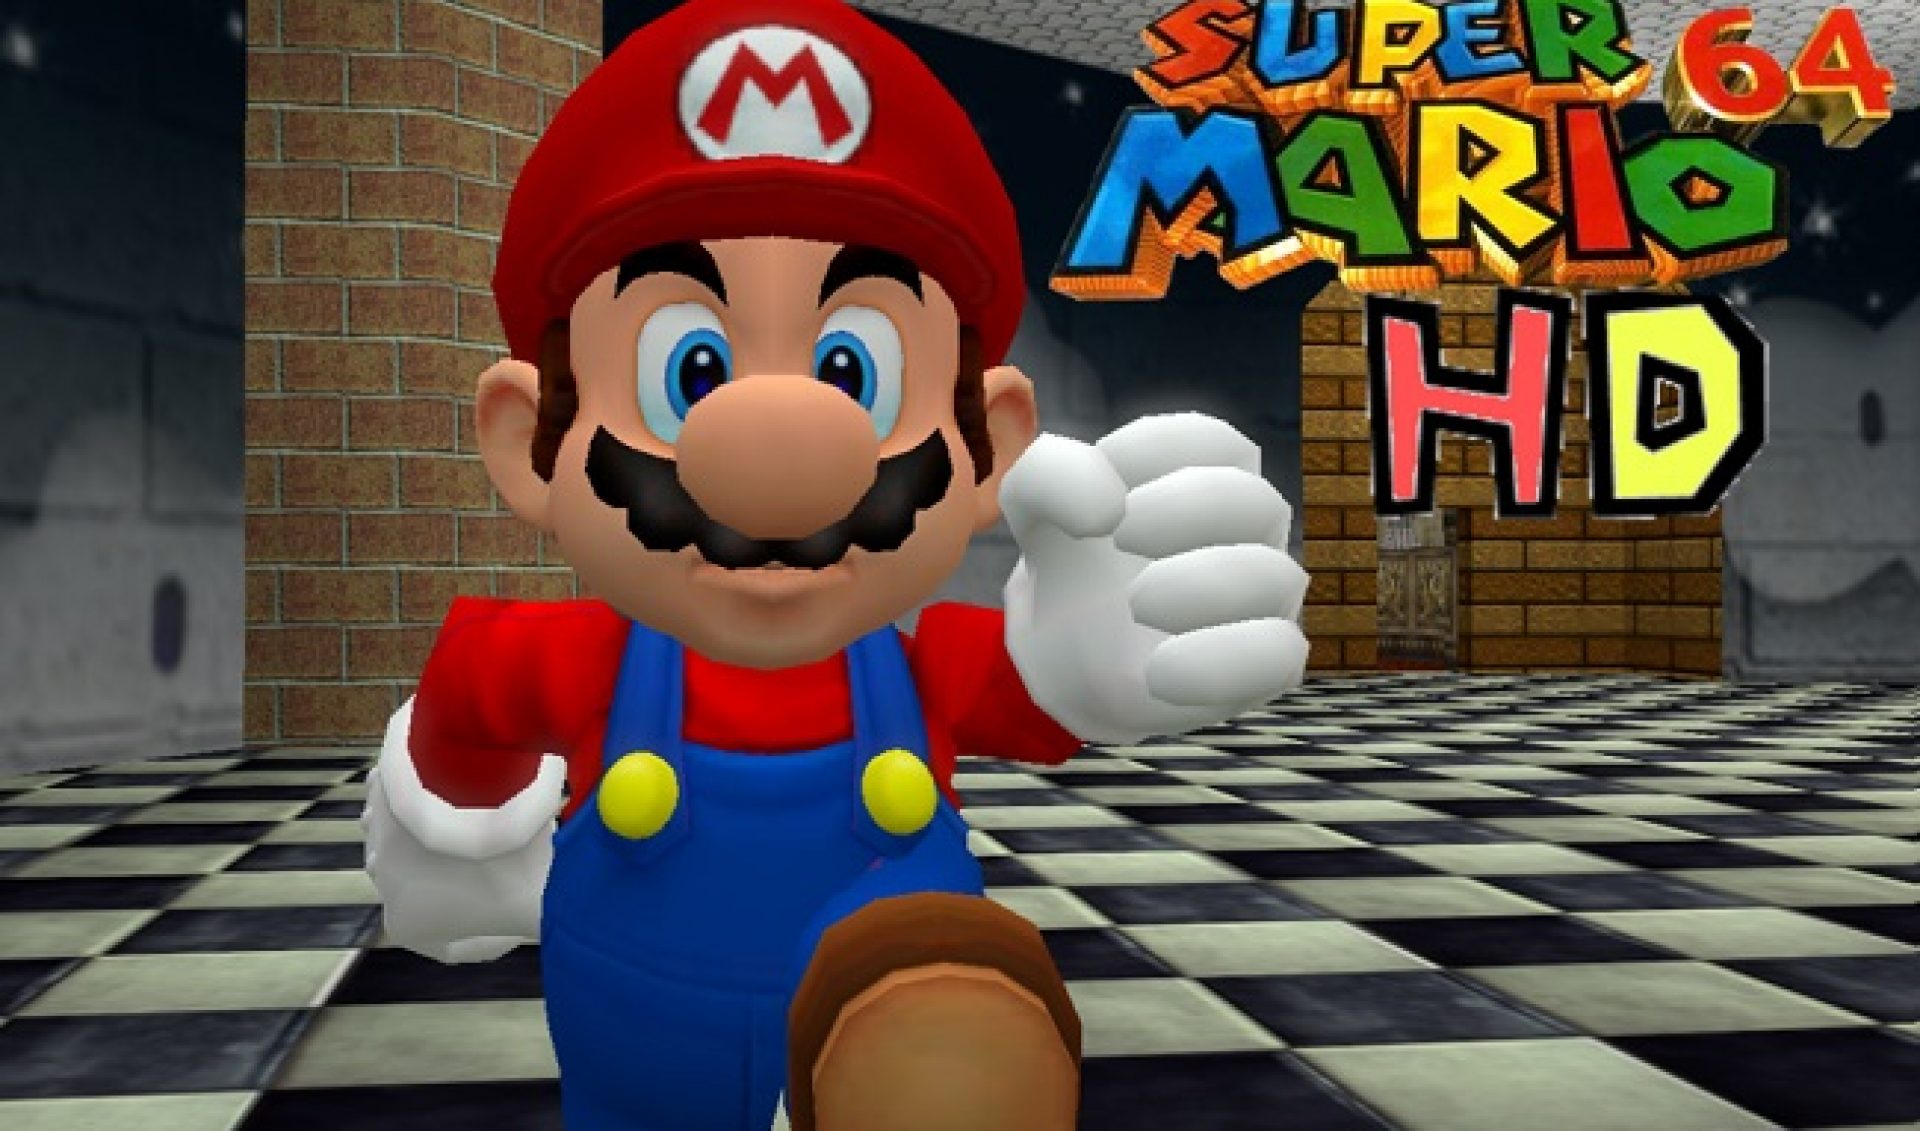 ‘Super Mario’ Breaks Into Top 20 Games On YouTube [INFOGRAPHIC]